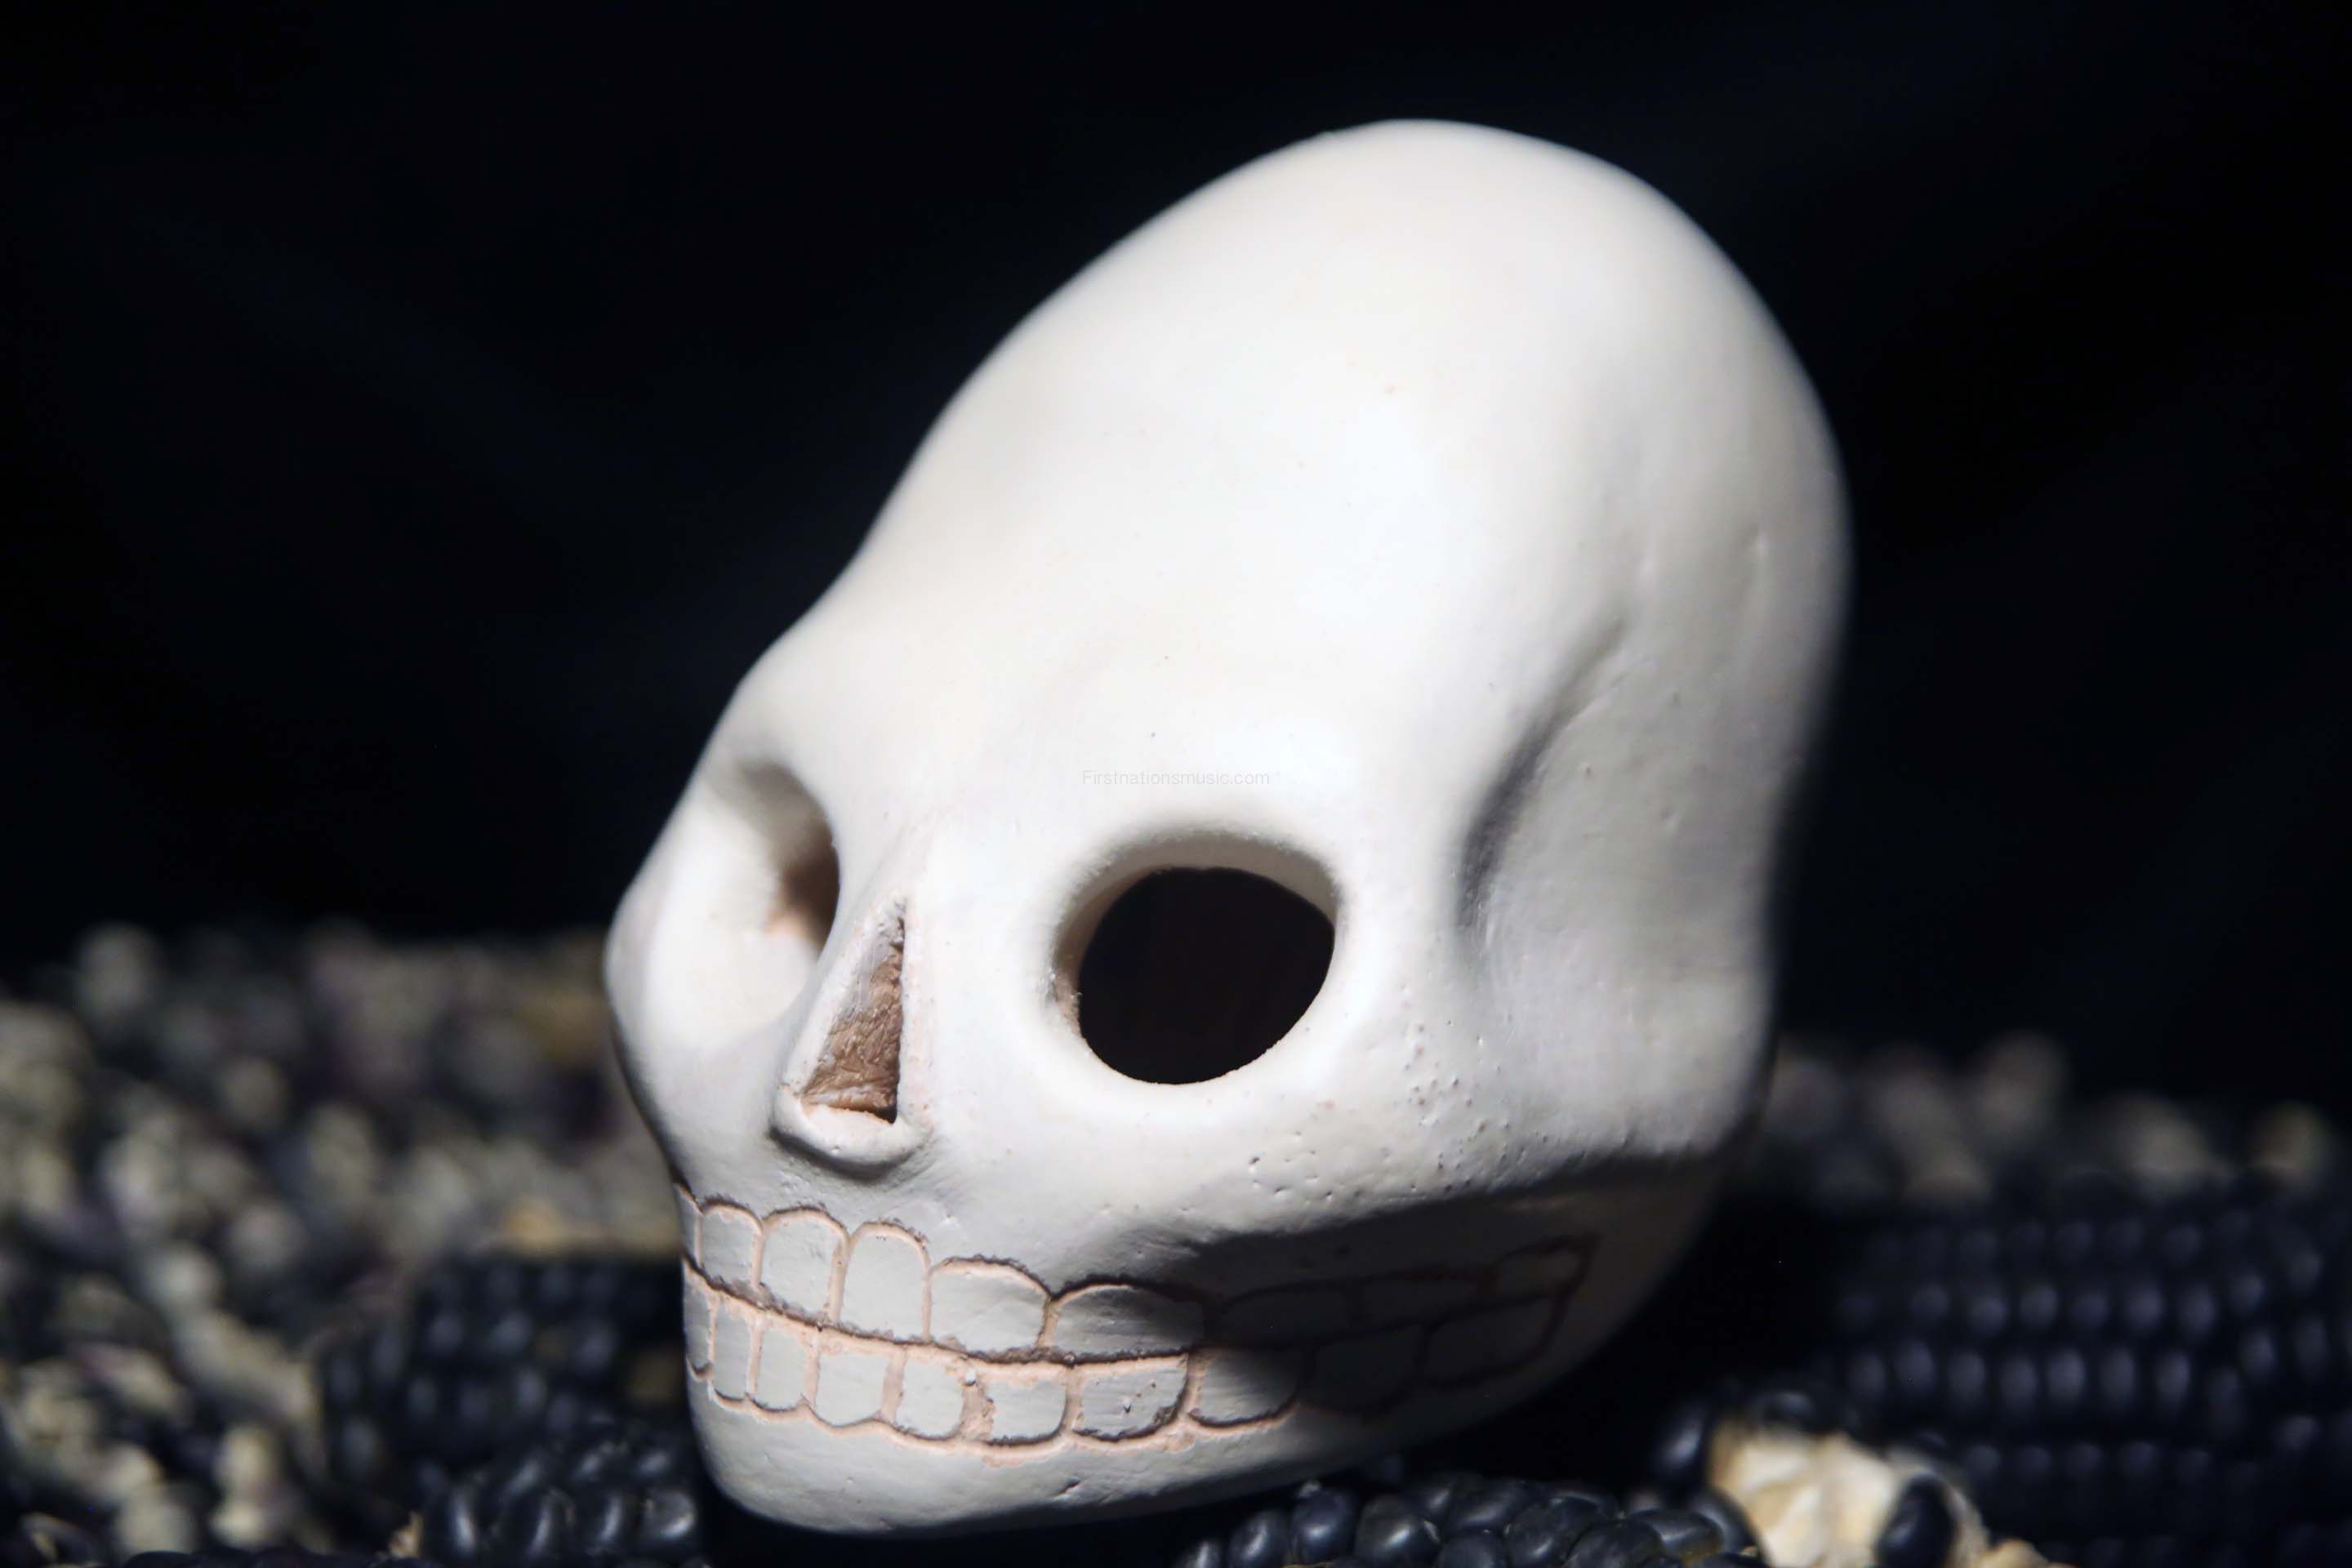 Aztec Death Whistle known for 'most terrifying sound in the world'  recreated by using 3D printing